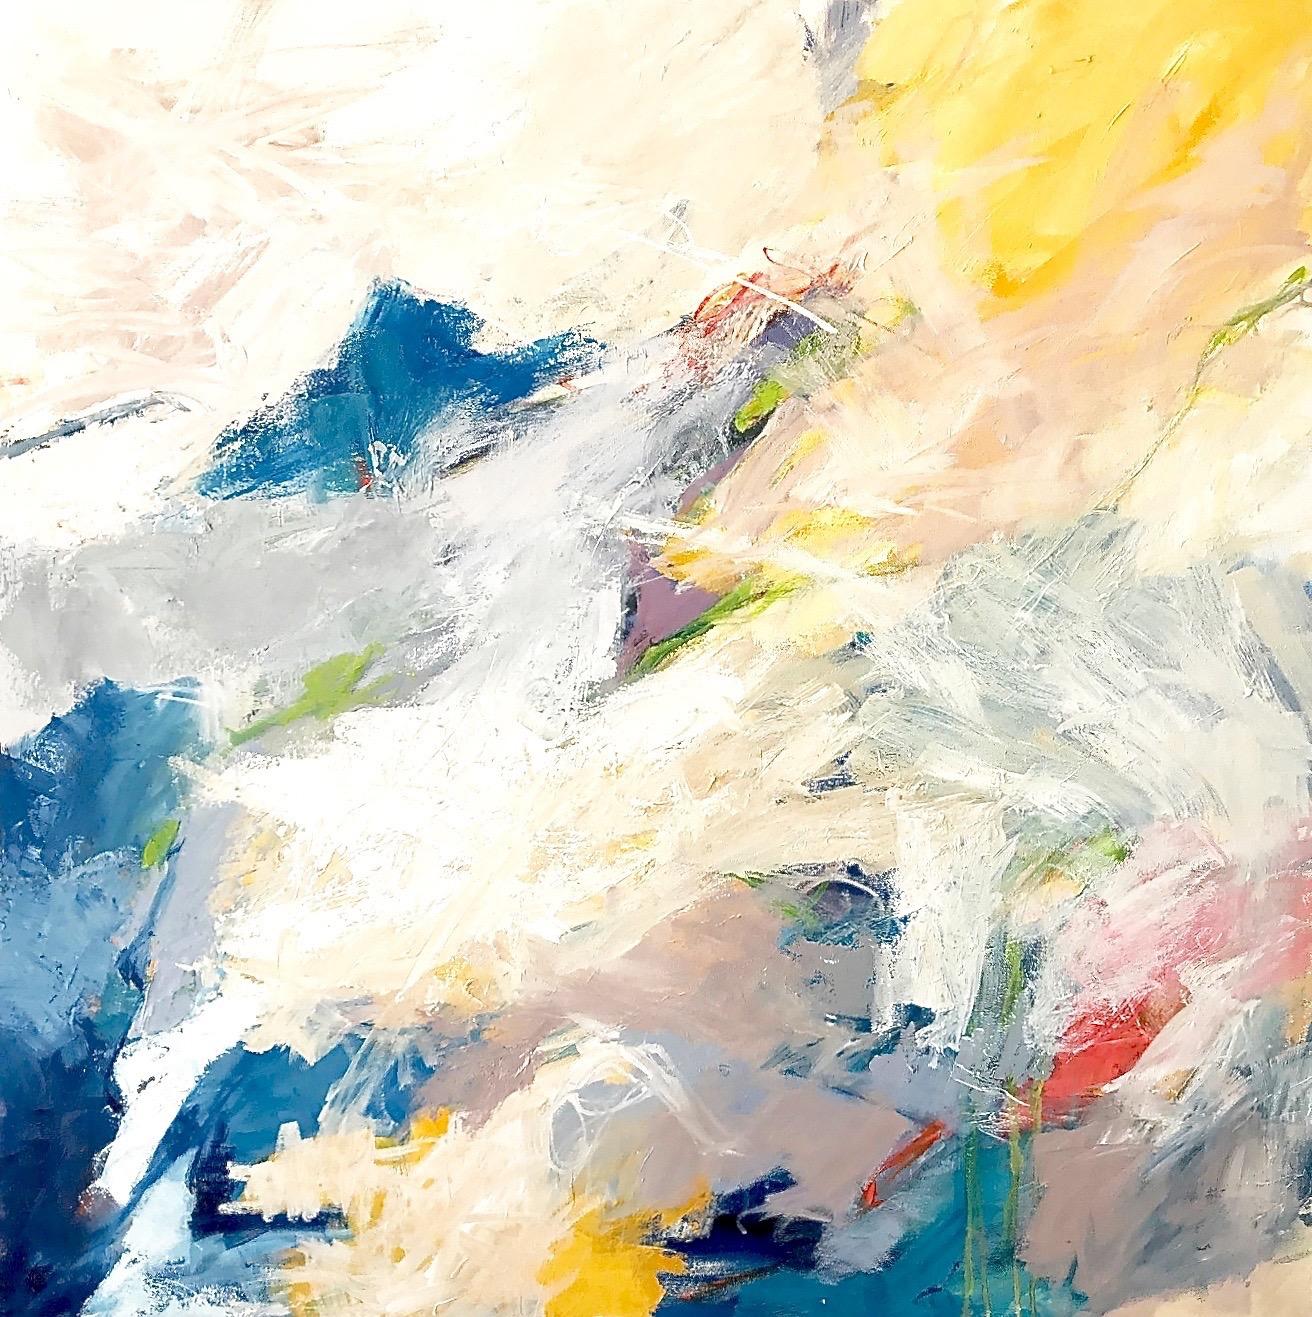 Cathy Bennigson Abstract Painting - "Tranquility" Abtsract Expressionist Ptg.  White/Lavender/Blue/Yellow/Red/Black